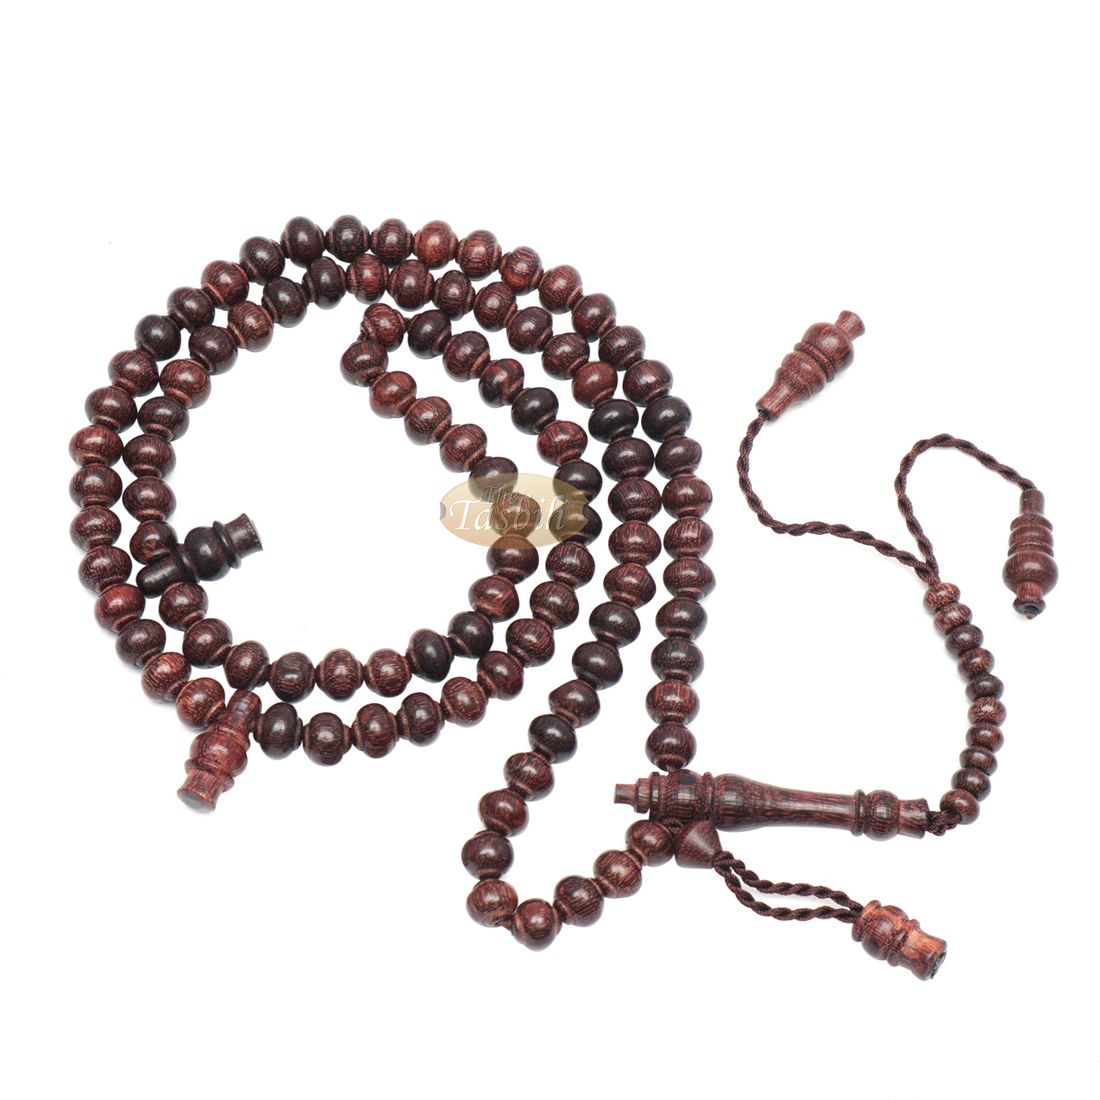 Handcrafted Tamarind Wood Tasbih Prayer Beads with 8x9mm Contoured Style 99-bead